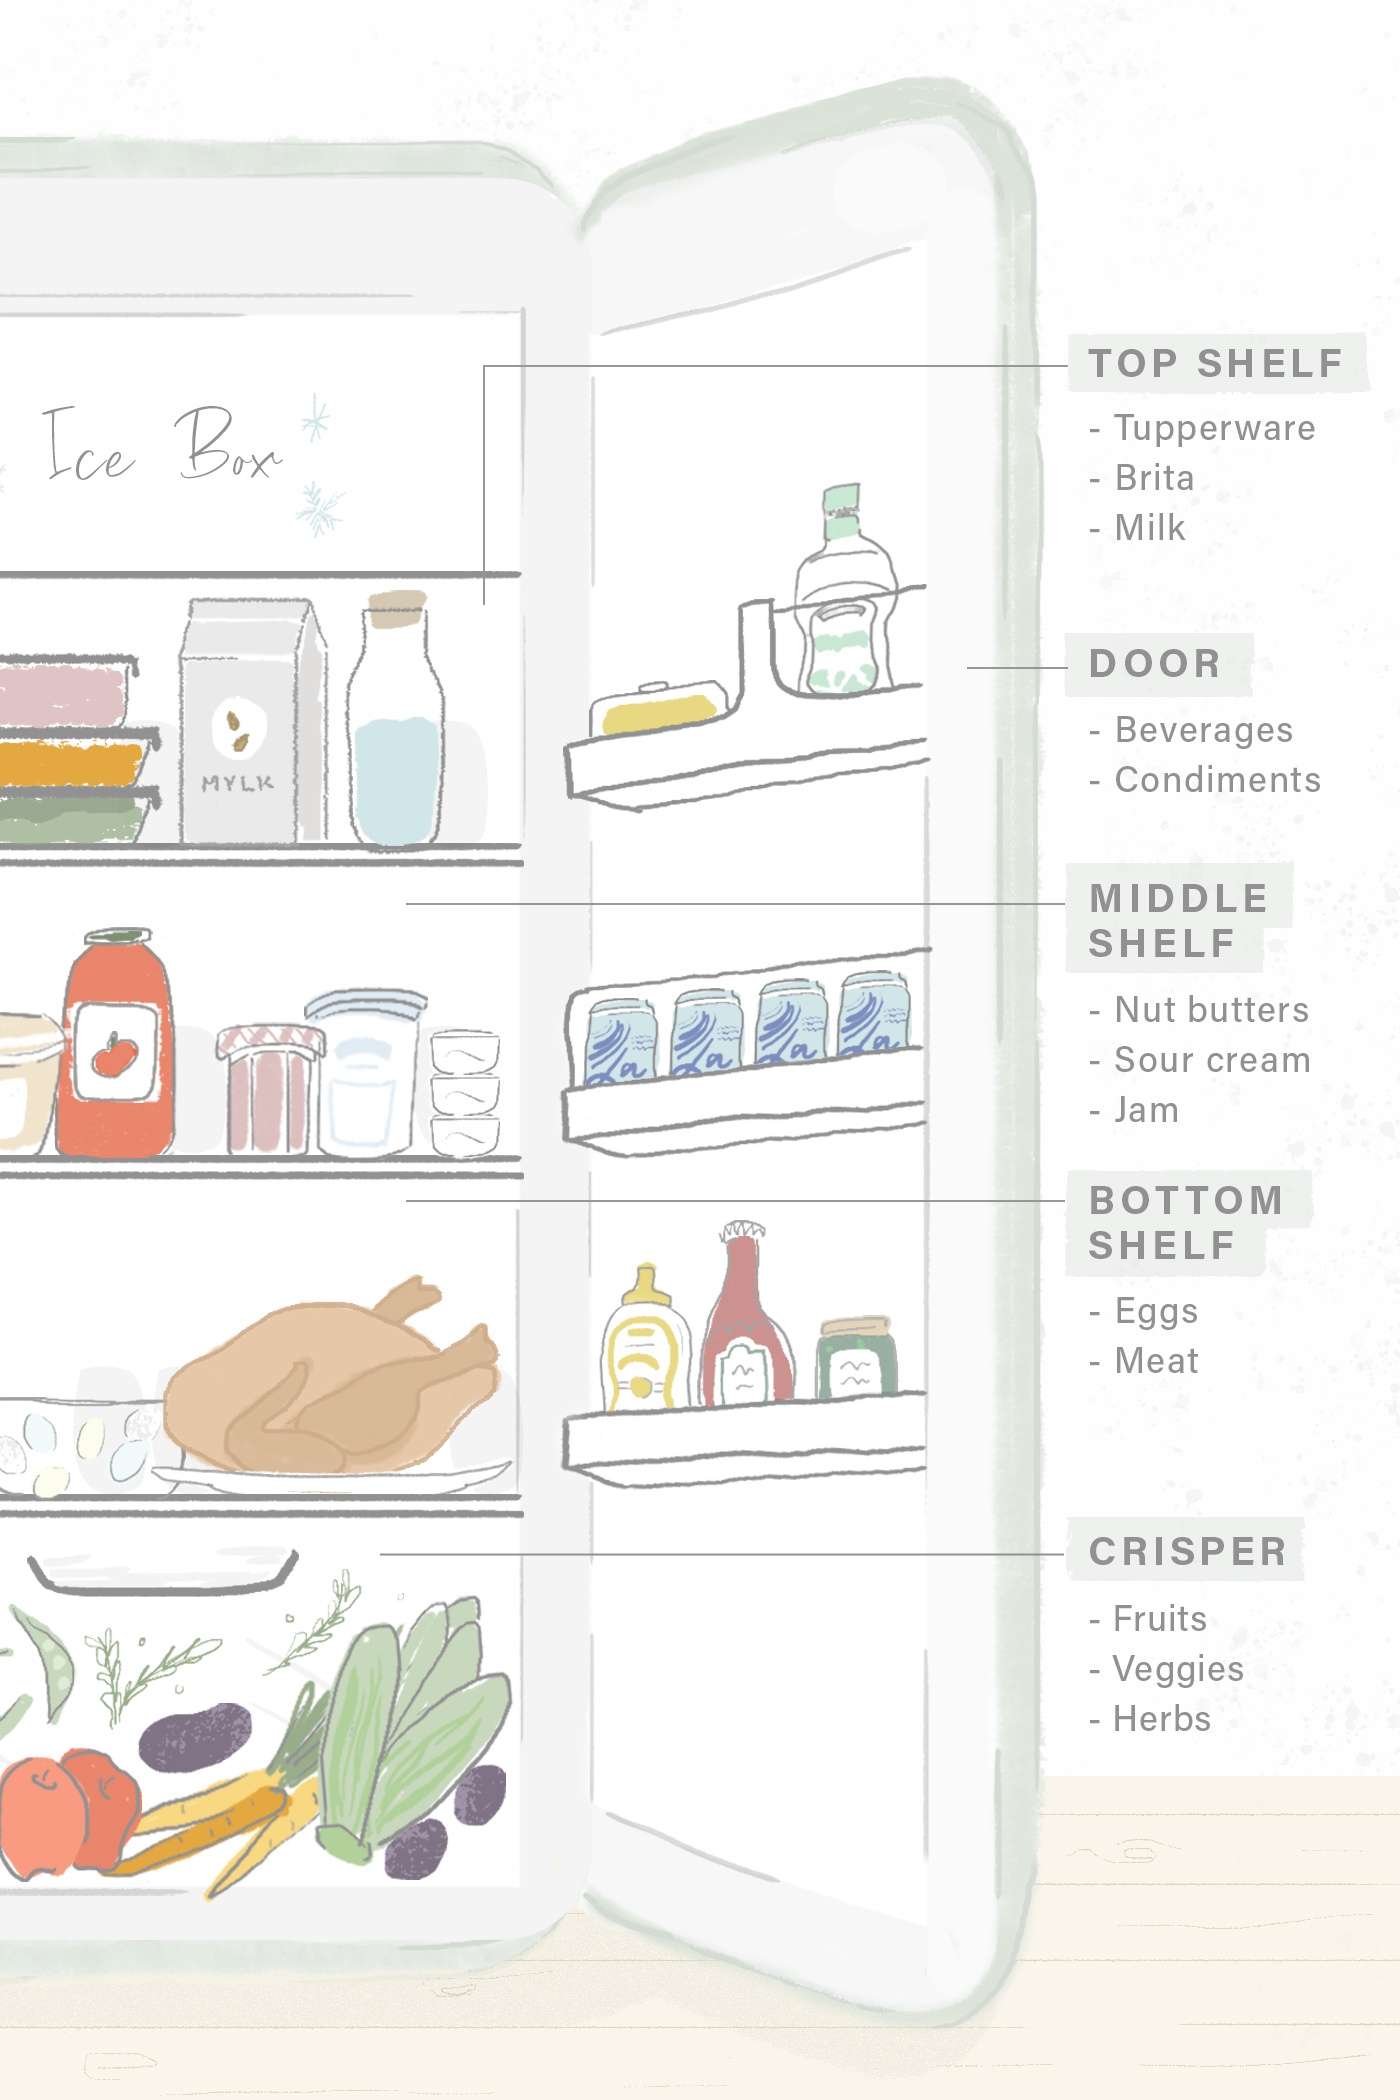 How to Organize Your Fridge, According to Pro Chefs